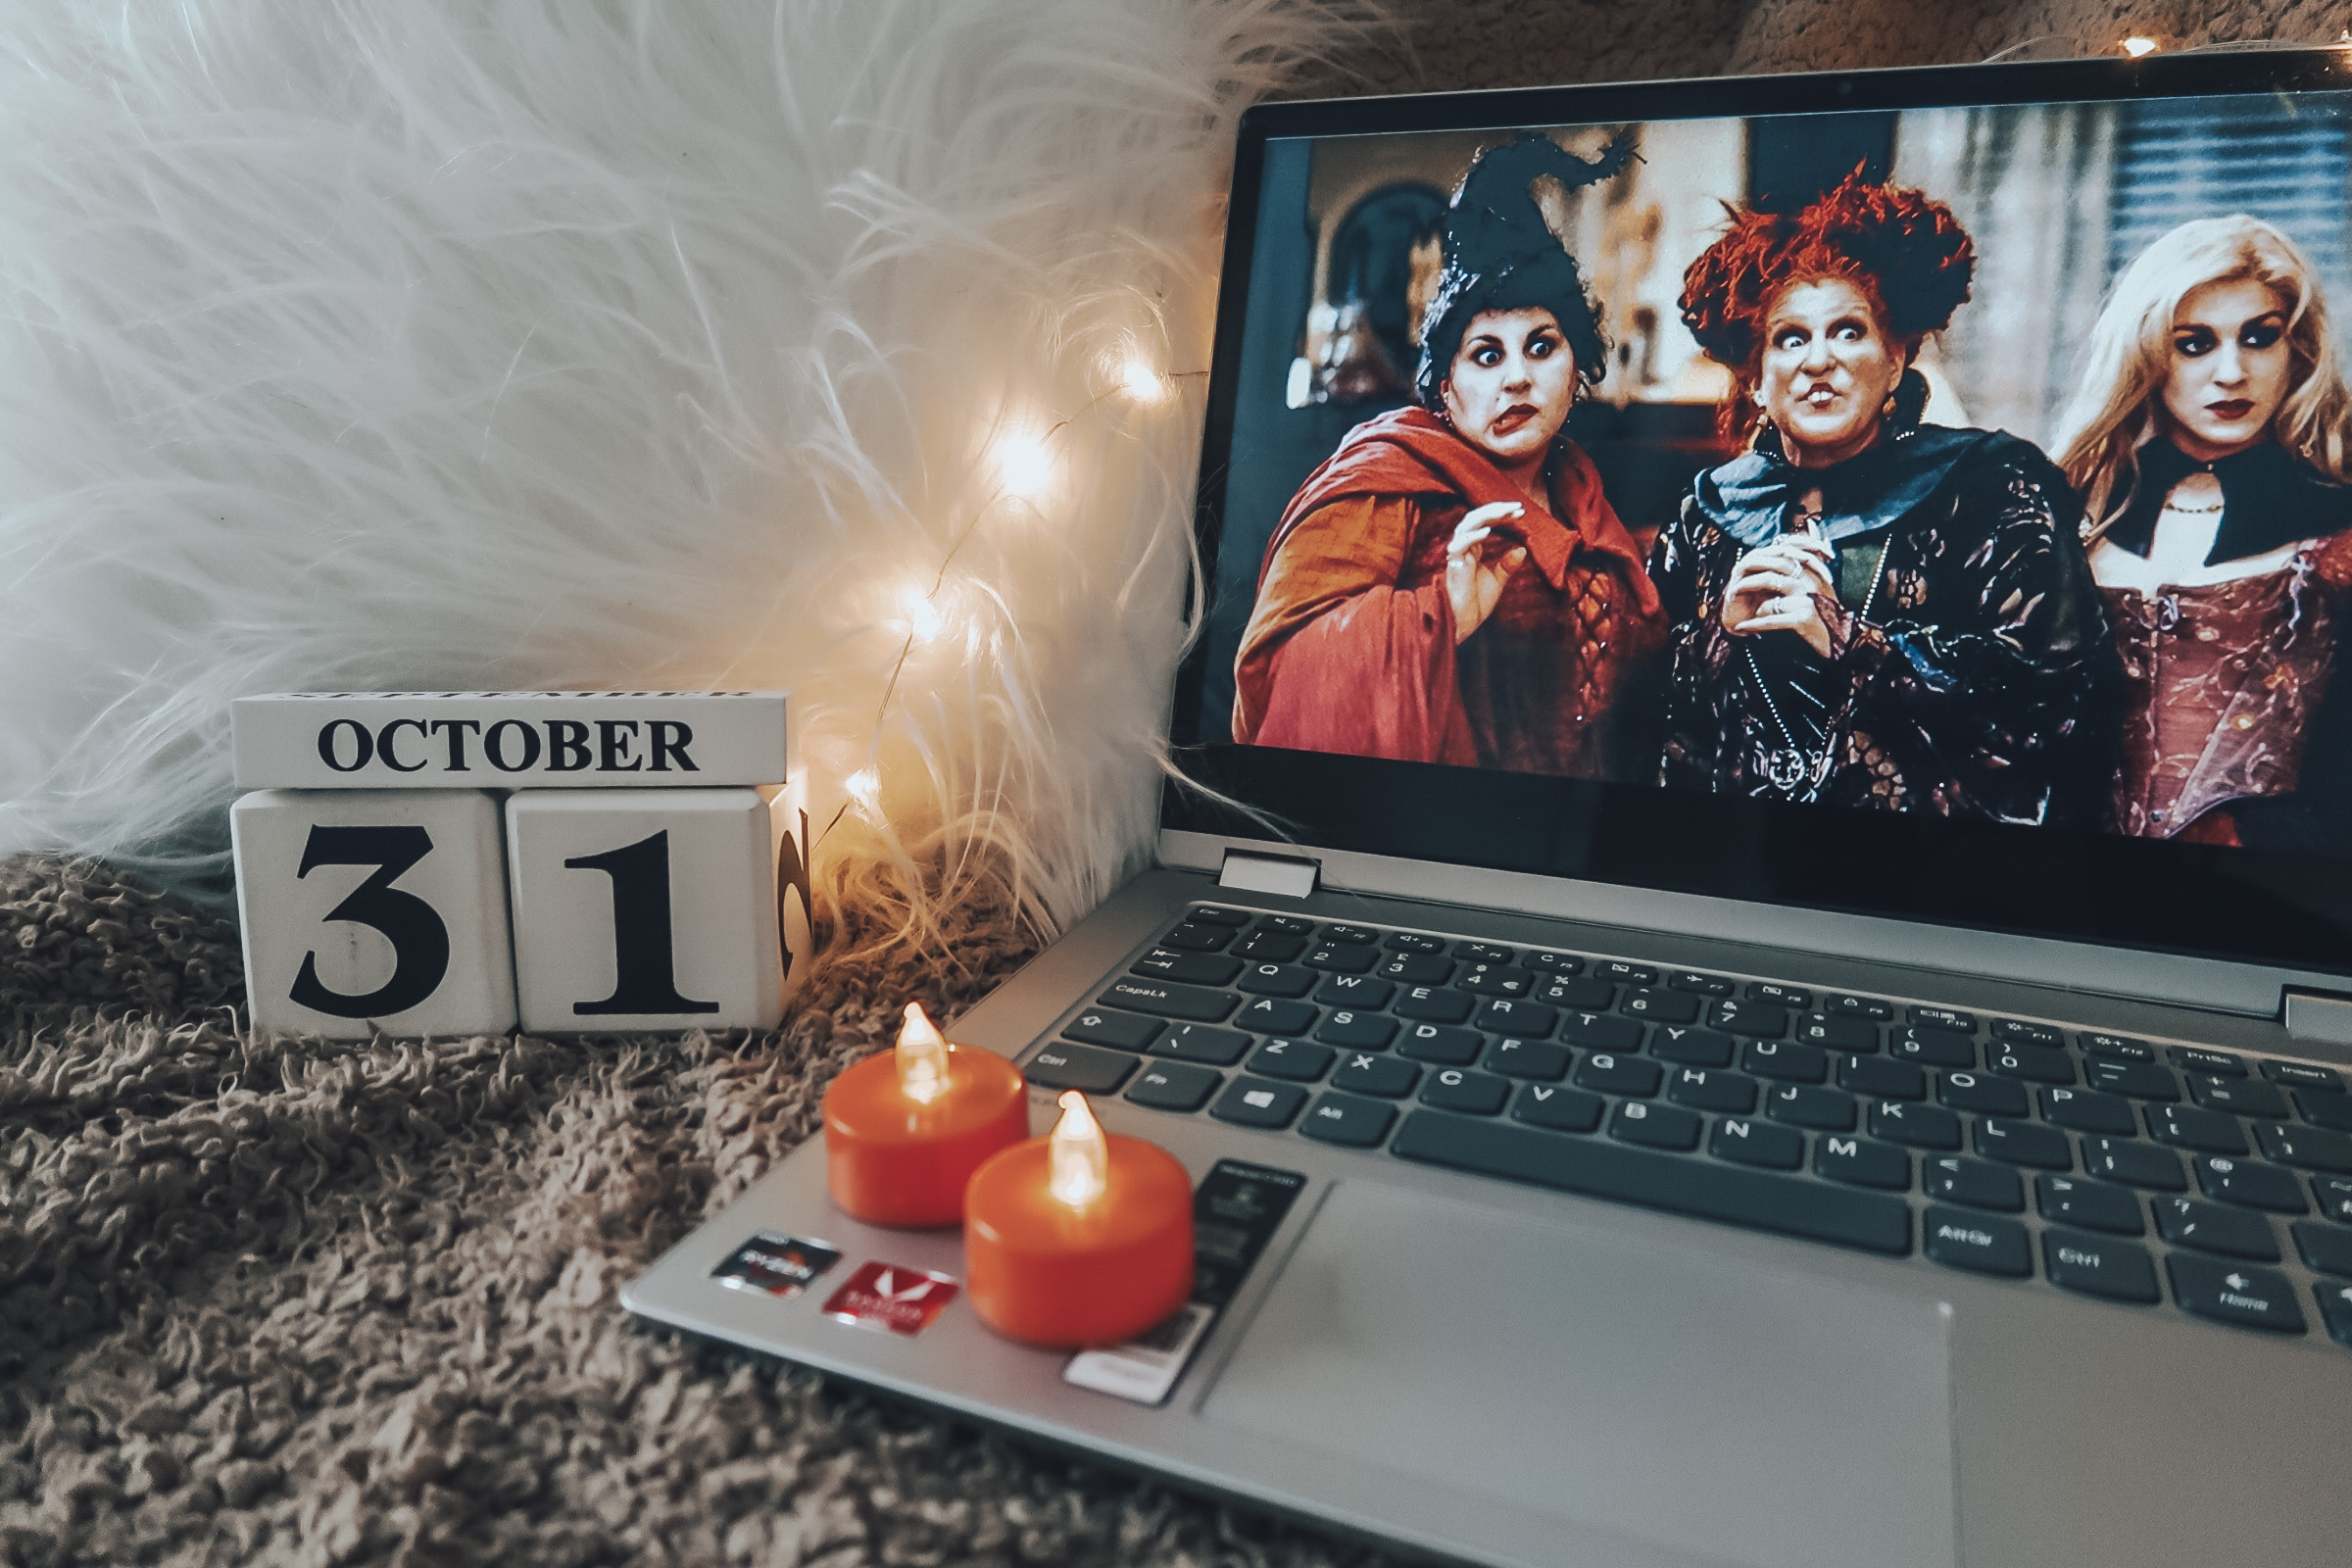 A laptop with Halloween themed movie, Hocus Pocus, on the screen